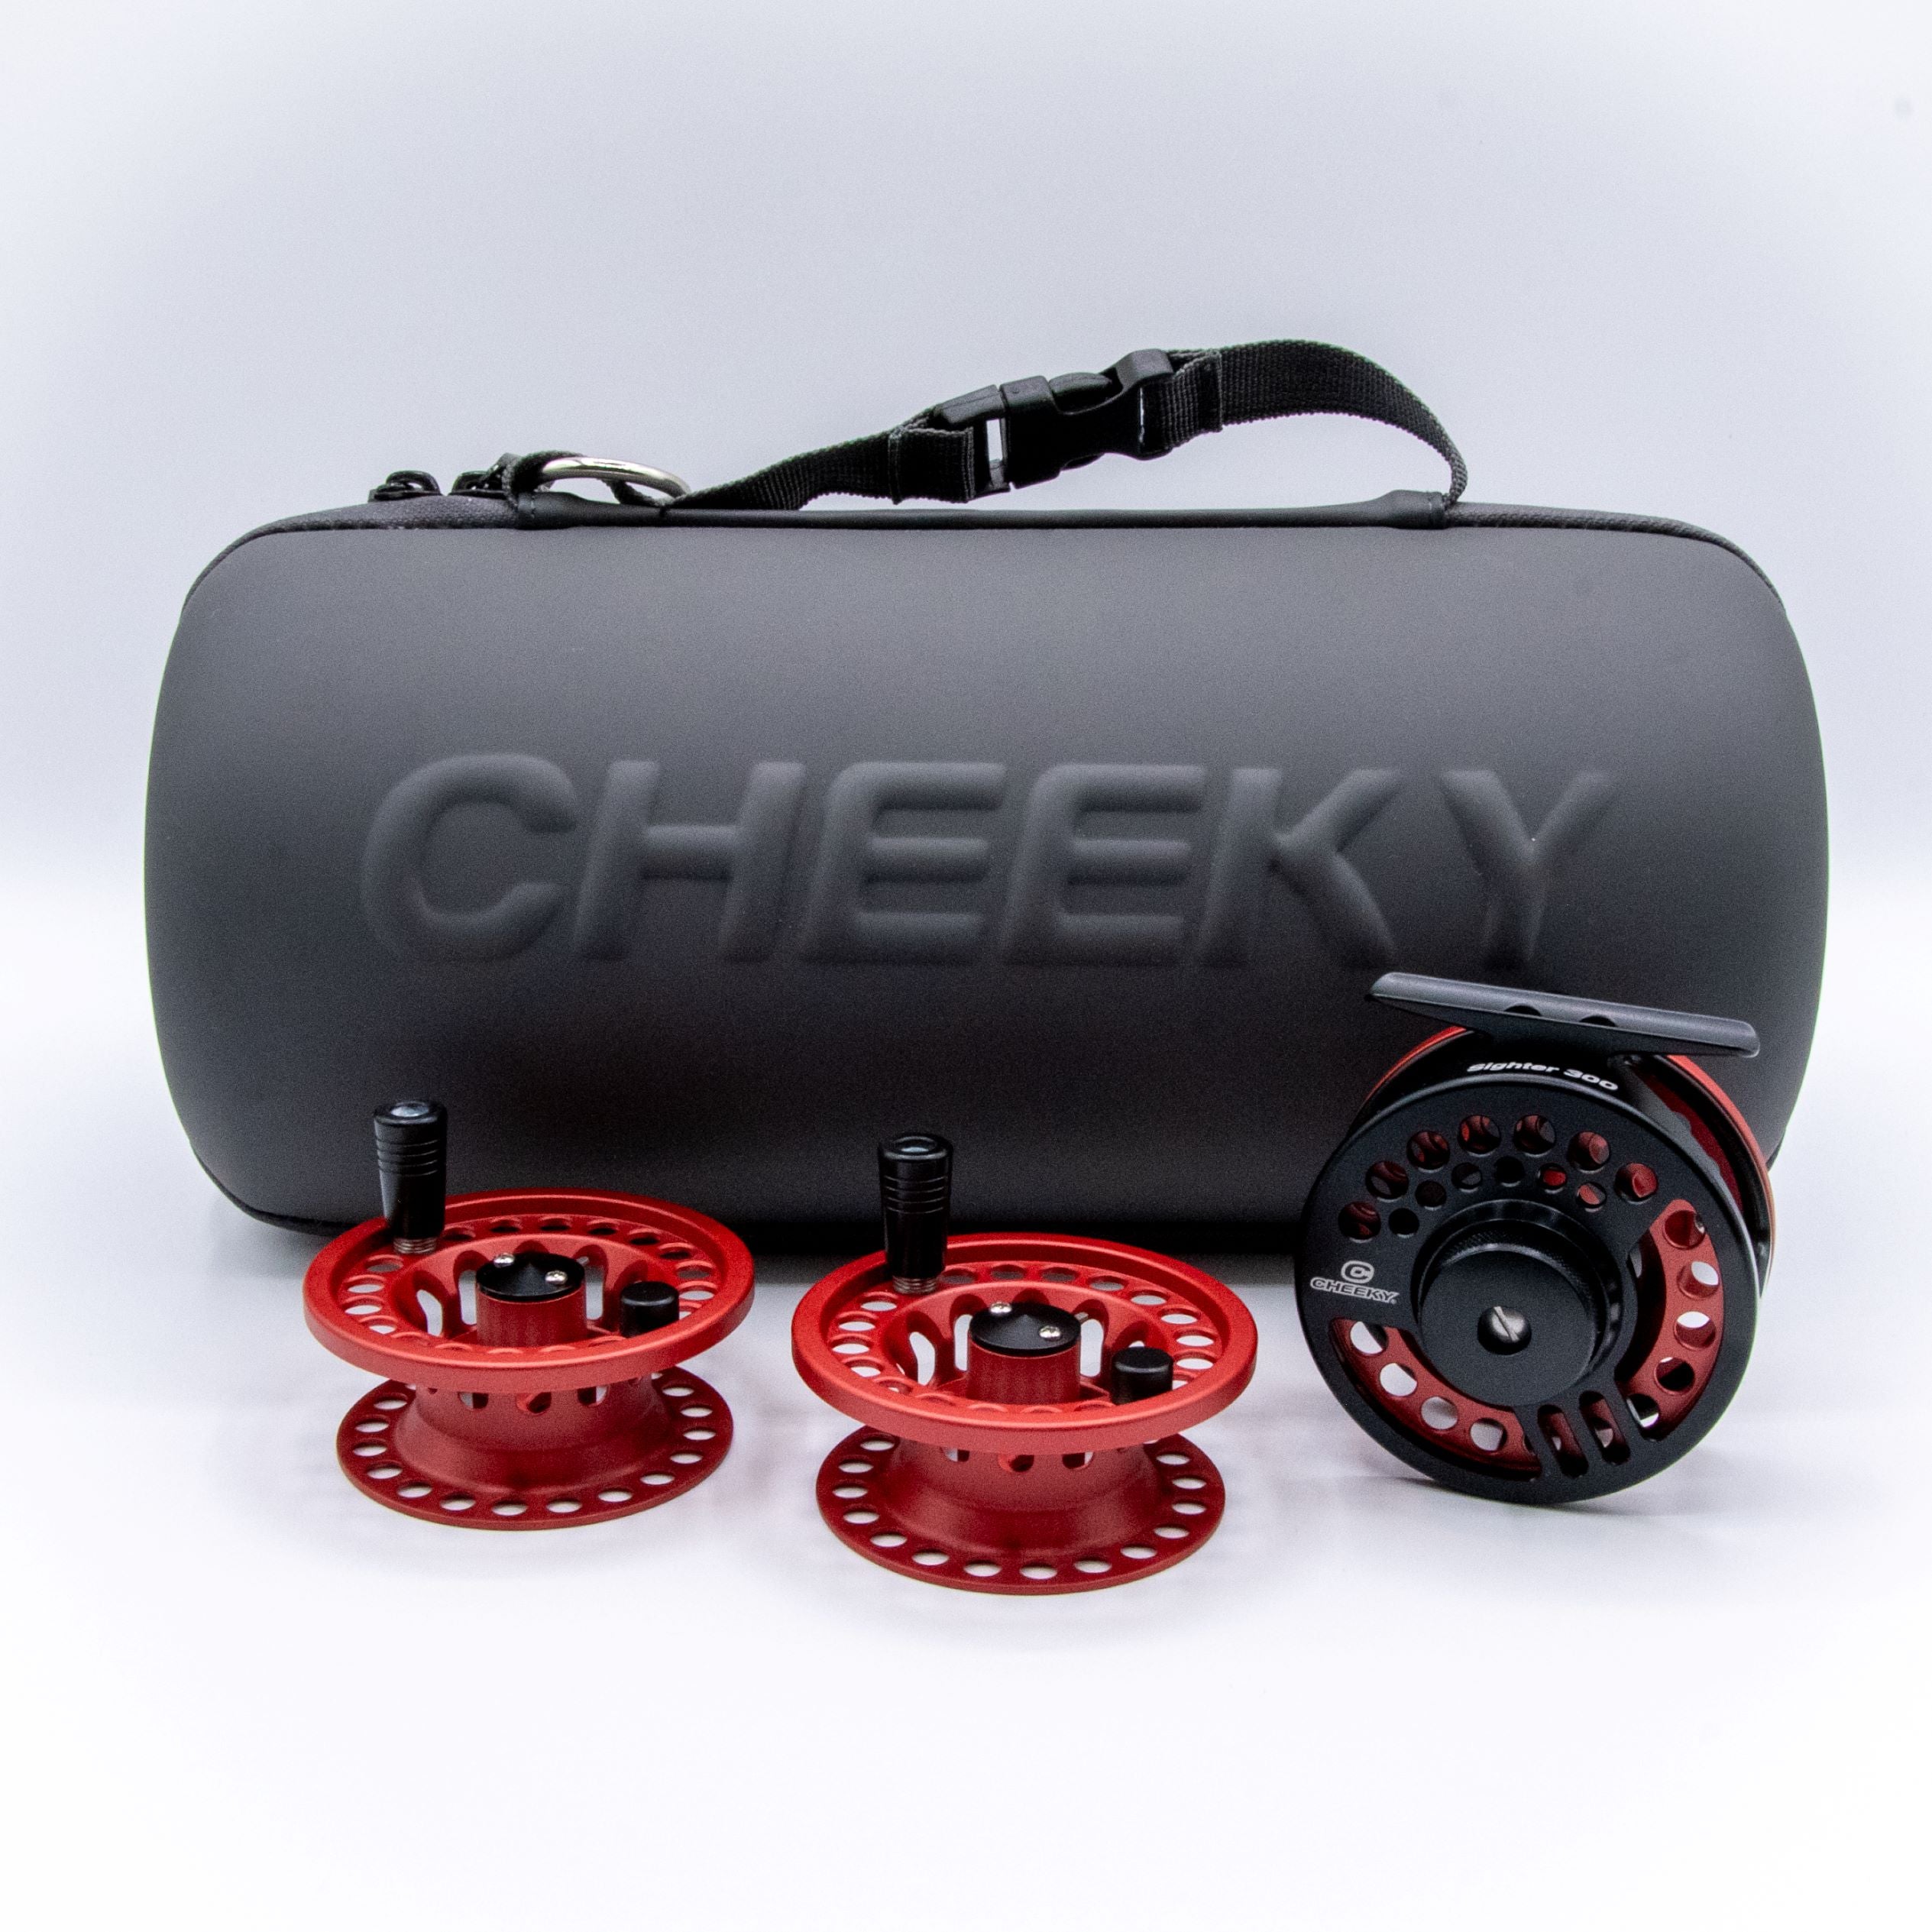 Cheeky Sighter Triple Play Fly Reel and Spool Bundle - Size 300 (2-3wt)